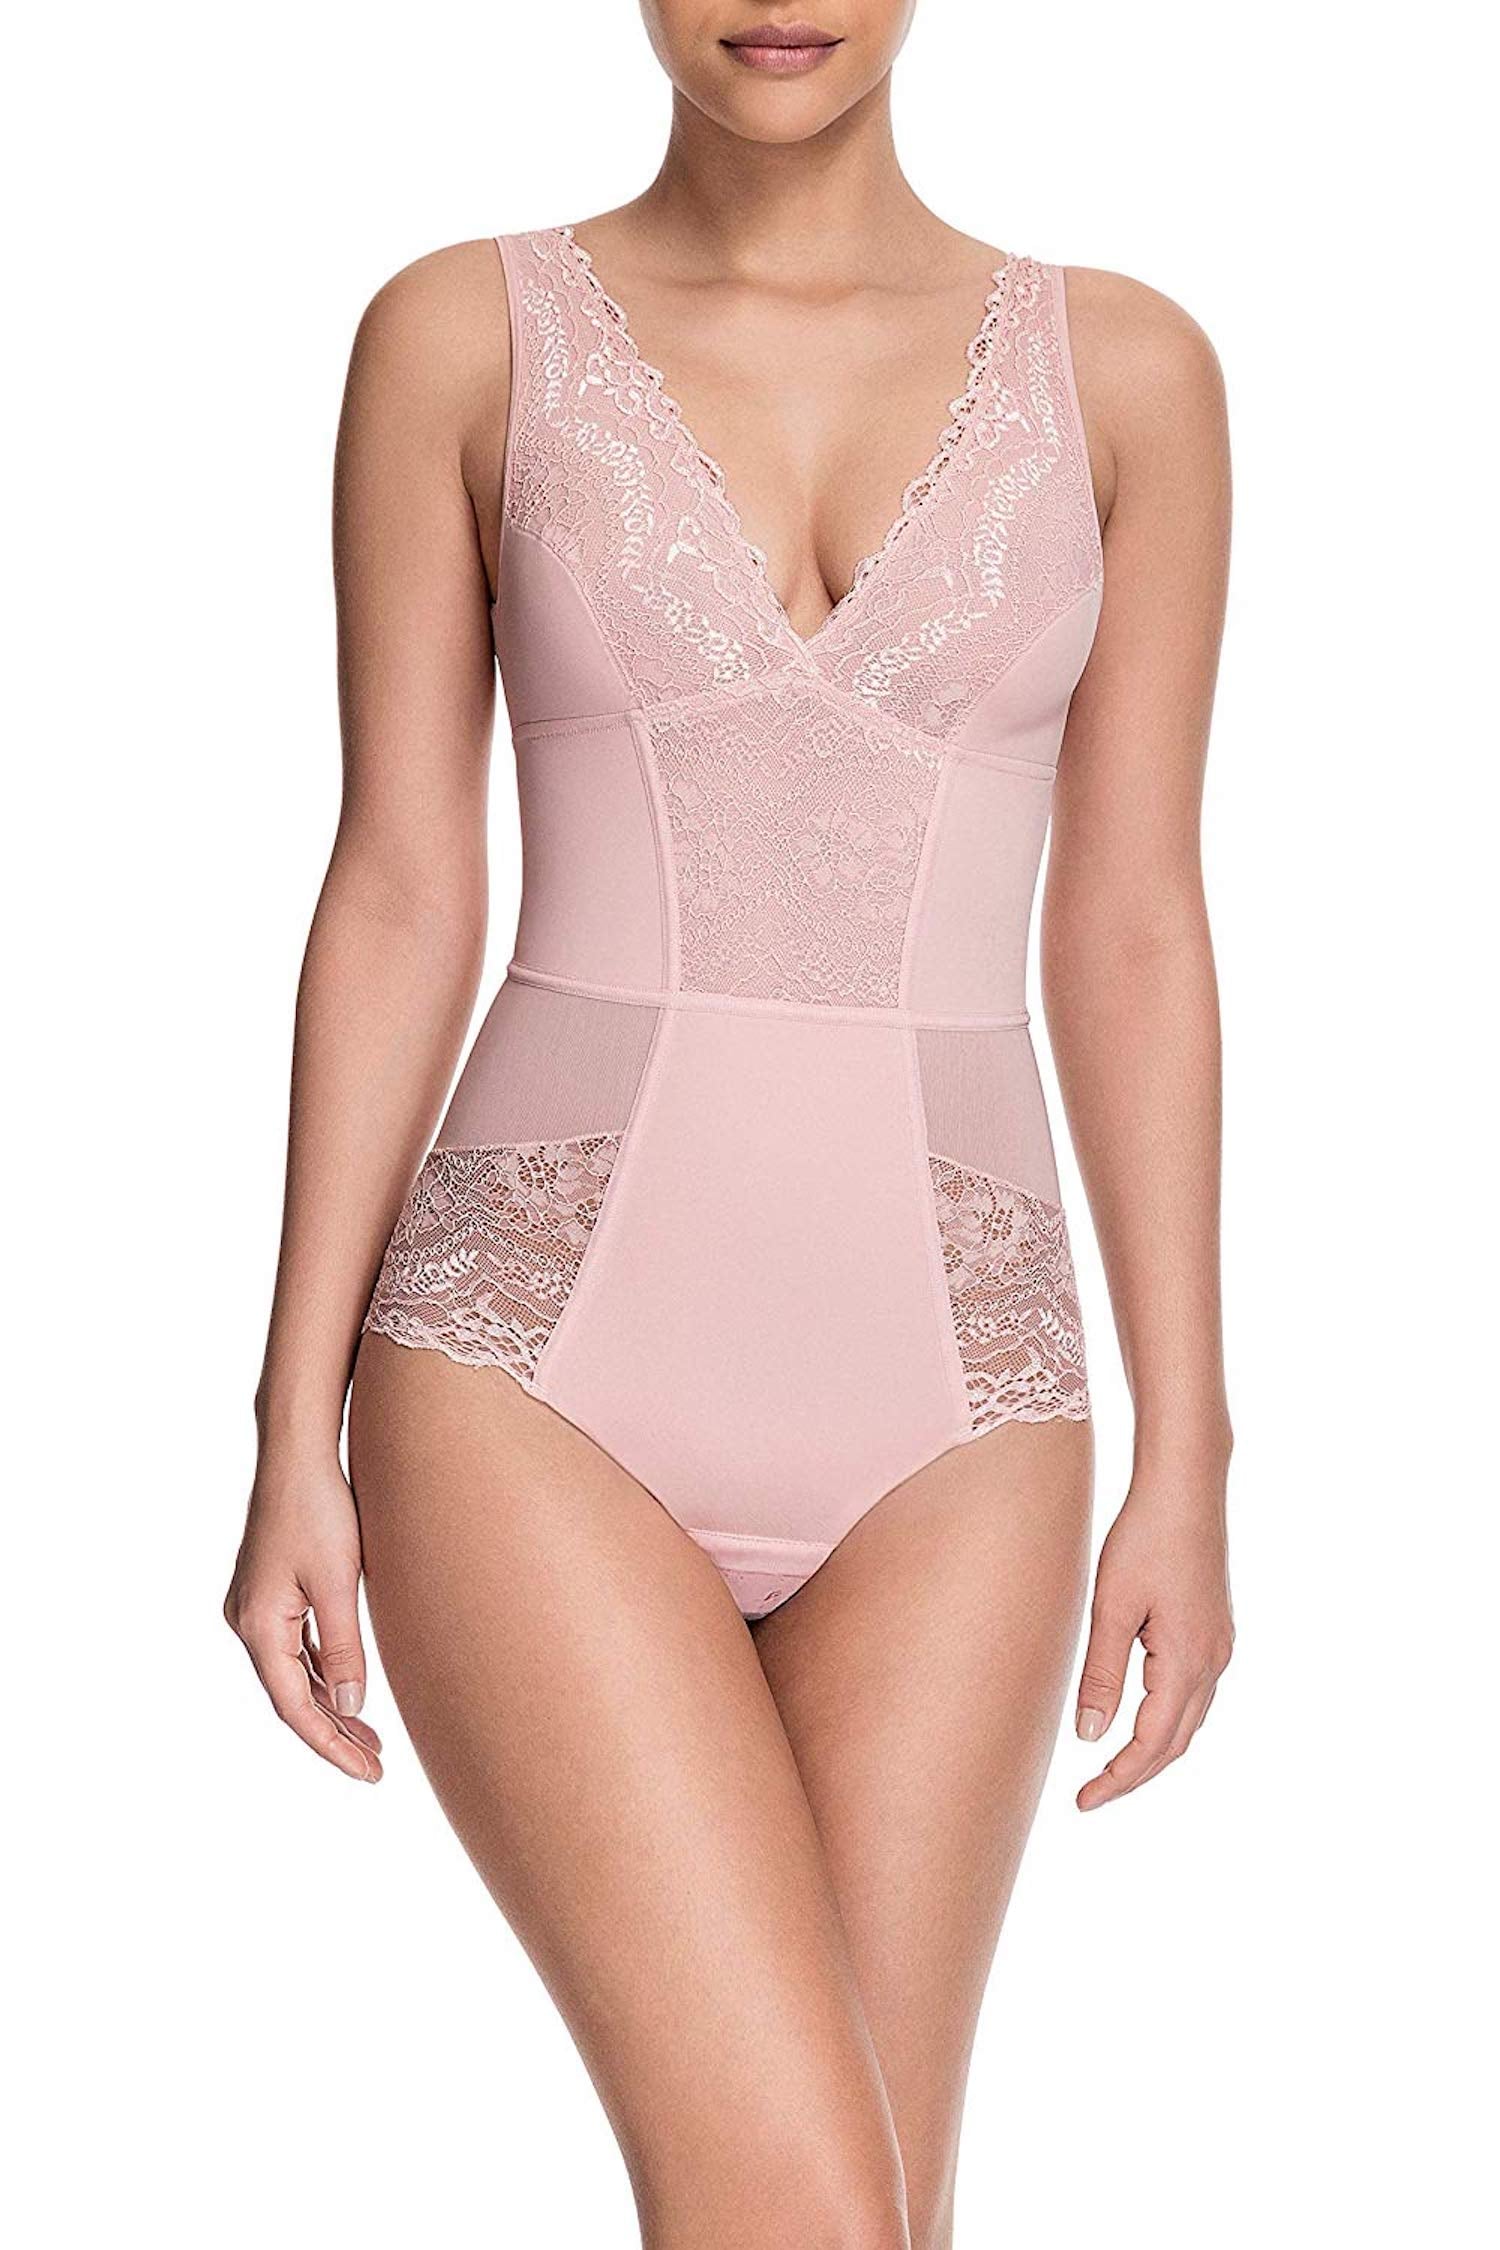 Bali Passion For Comfort Minimizer Body Shaper at  Women's